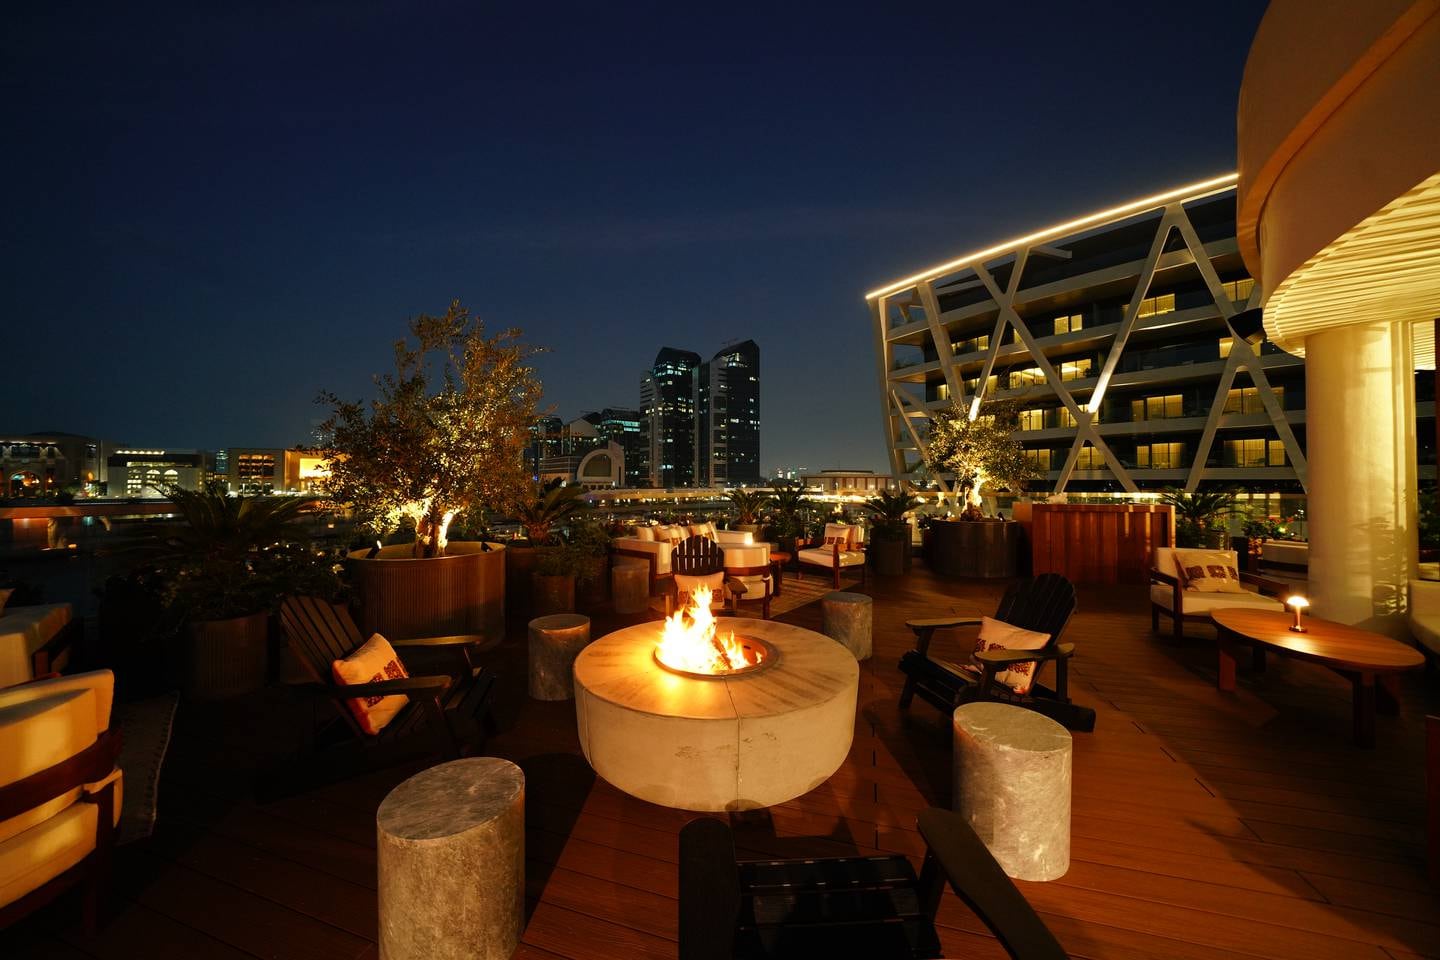 Rooftop venue Annex Abu Dhabi will offer views of the Corniche fireworks. Photo: Abu Dhabi Edition